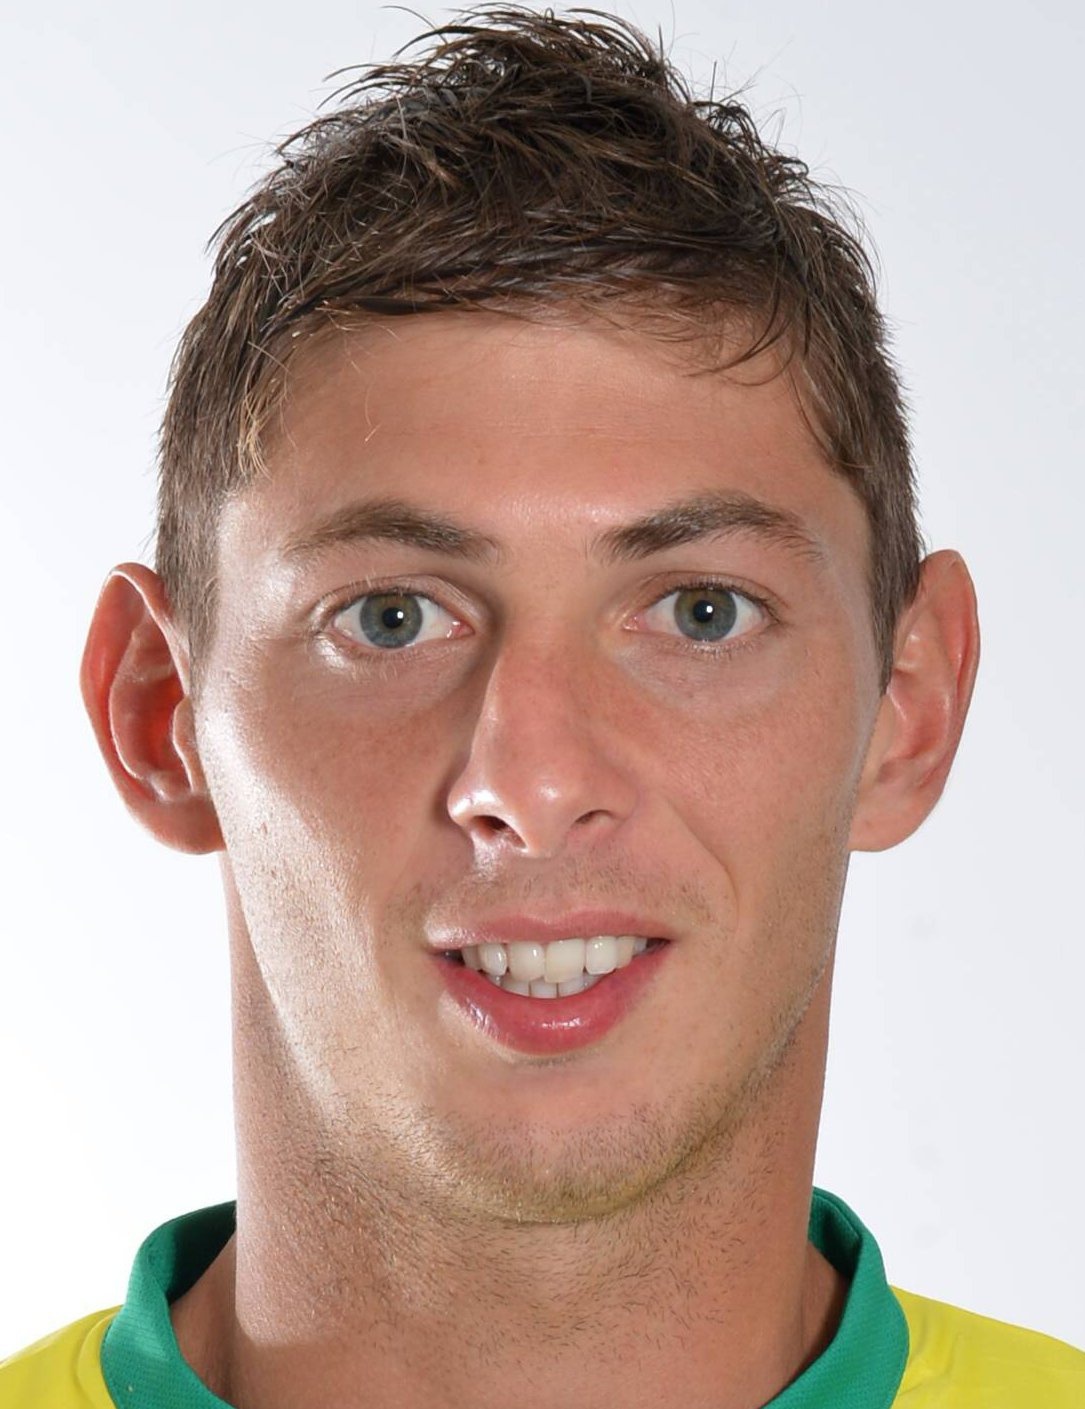 Emiliano Sala is a new signing for Cardiff City FC. Possibly involved in plane crash /  missing plane off Les Casquets in Alderney.. (26500373)